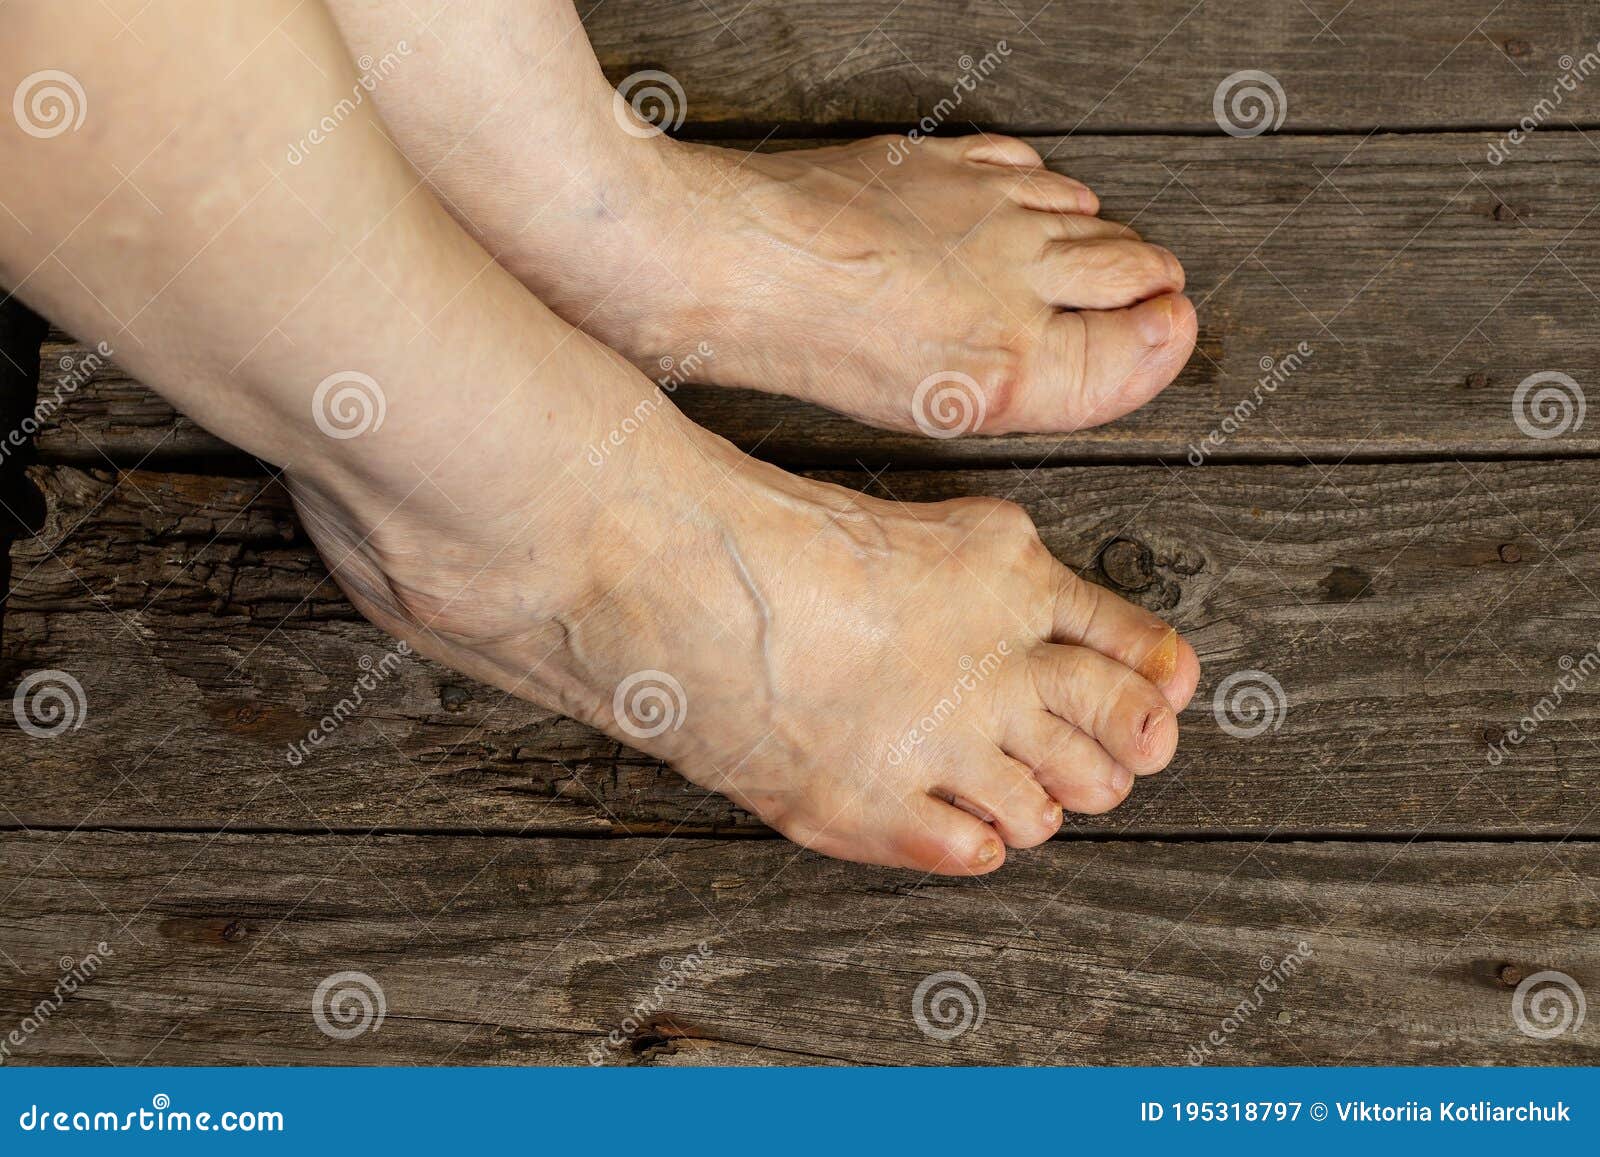 1174 Old Lady Feet Stock Photos & High-res Pictures